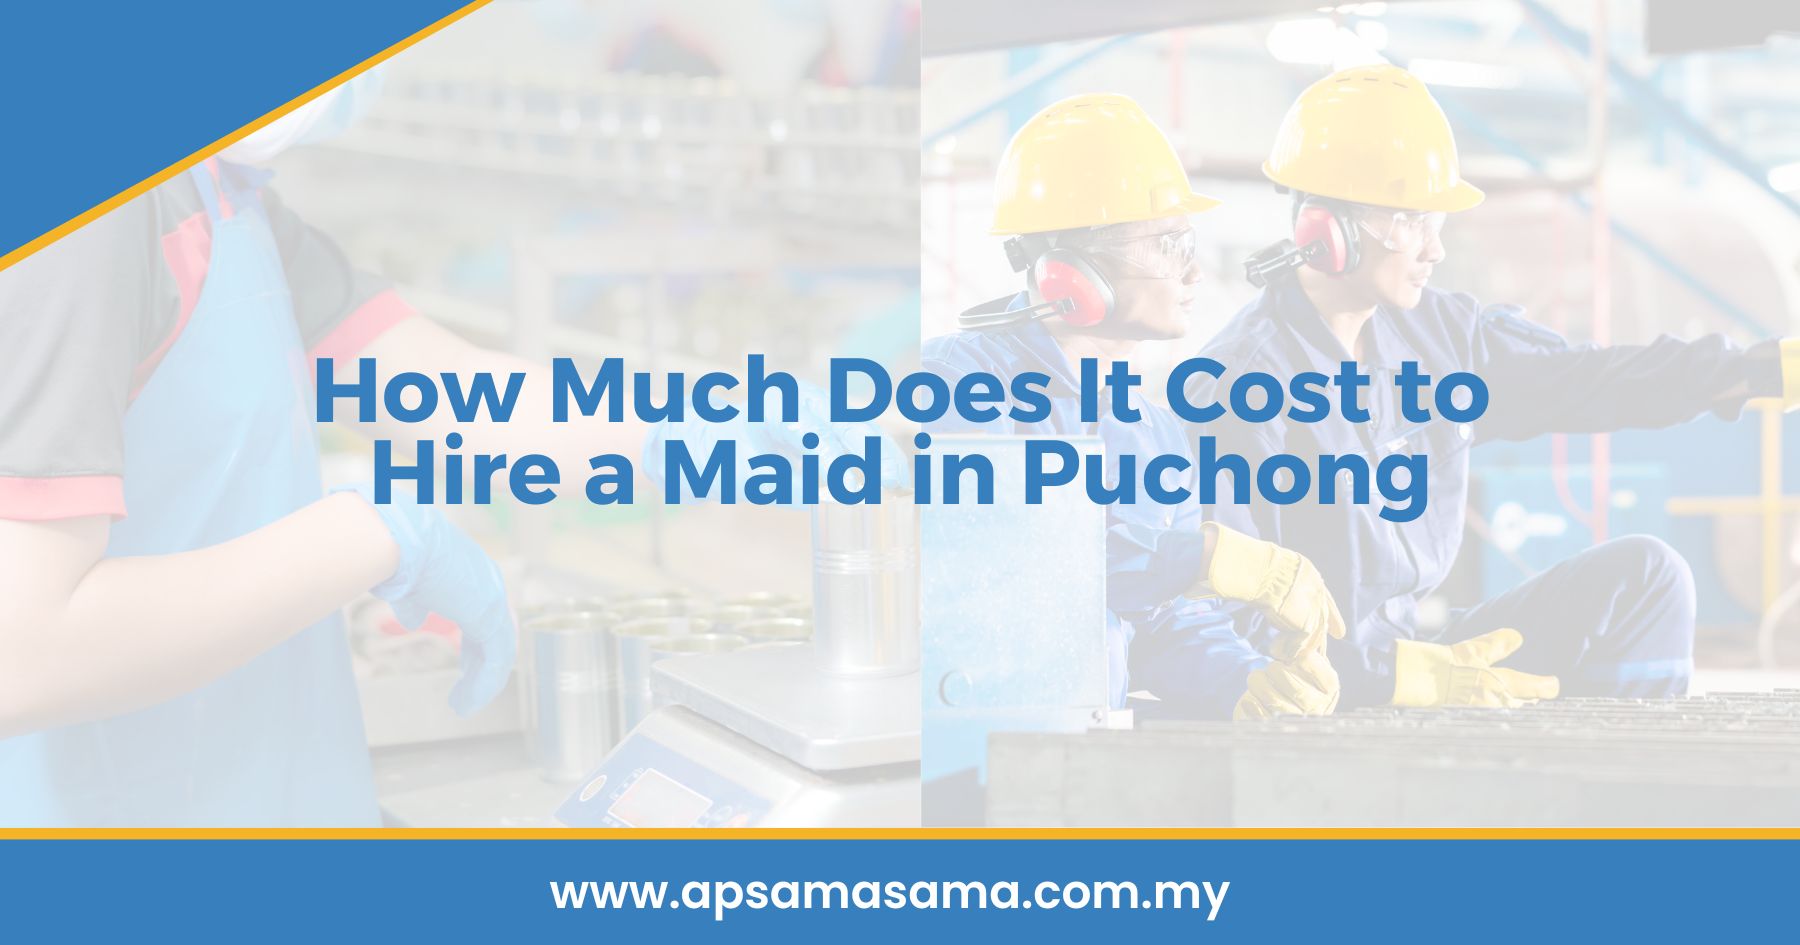 How Much Does It Cost to Hire a Maid in Puchong